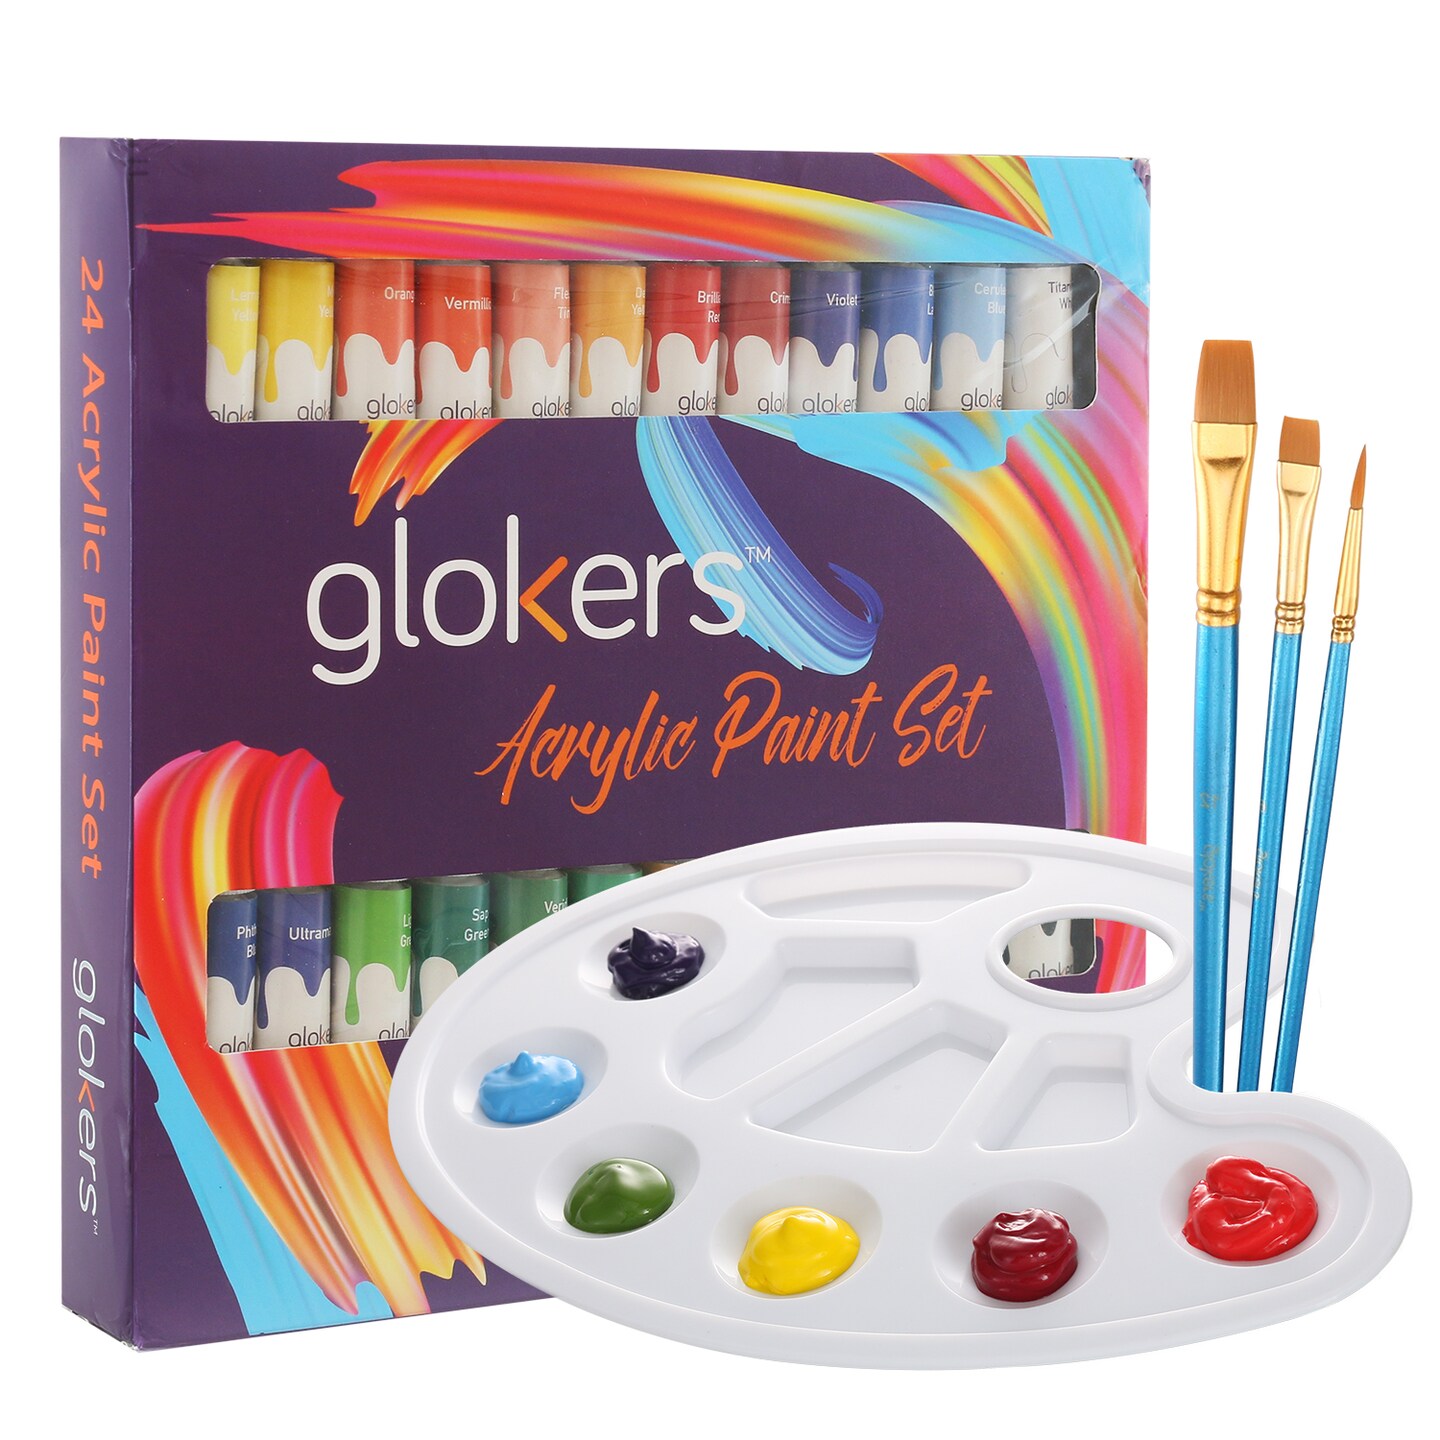 Acrylic Paint Set, 24 Colors, With 3 Paint Brushes, by Glokers